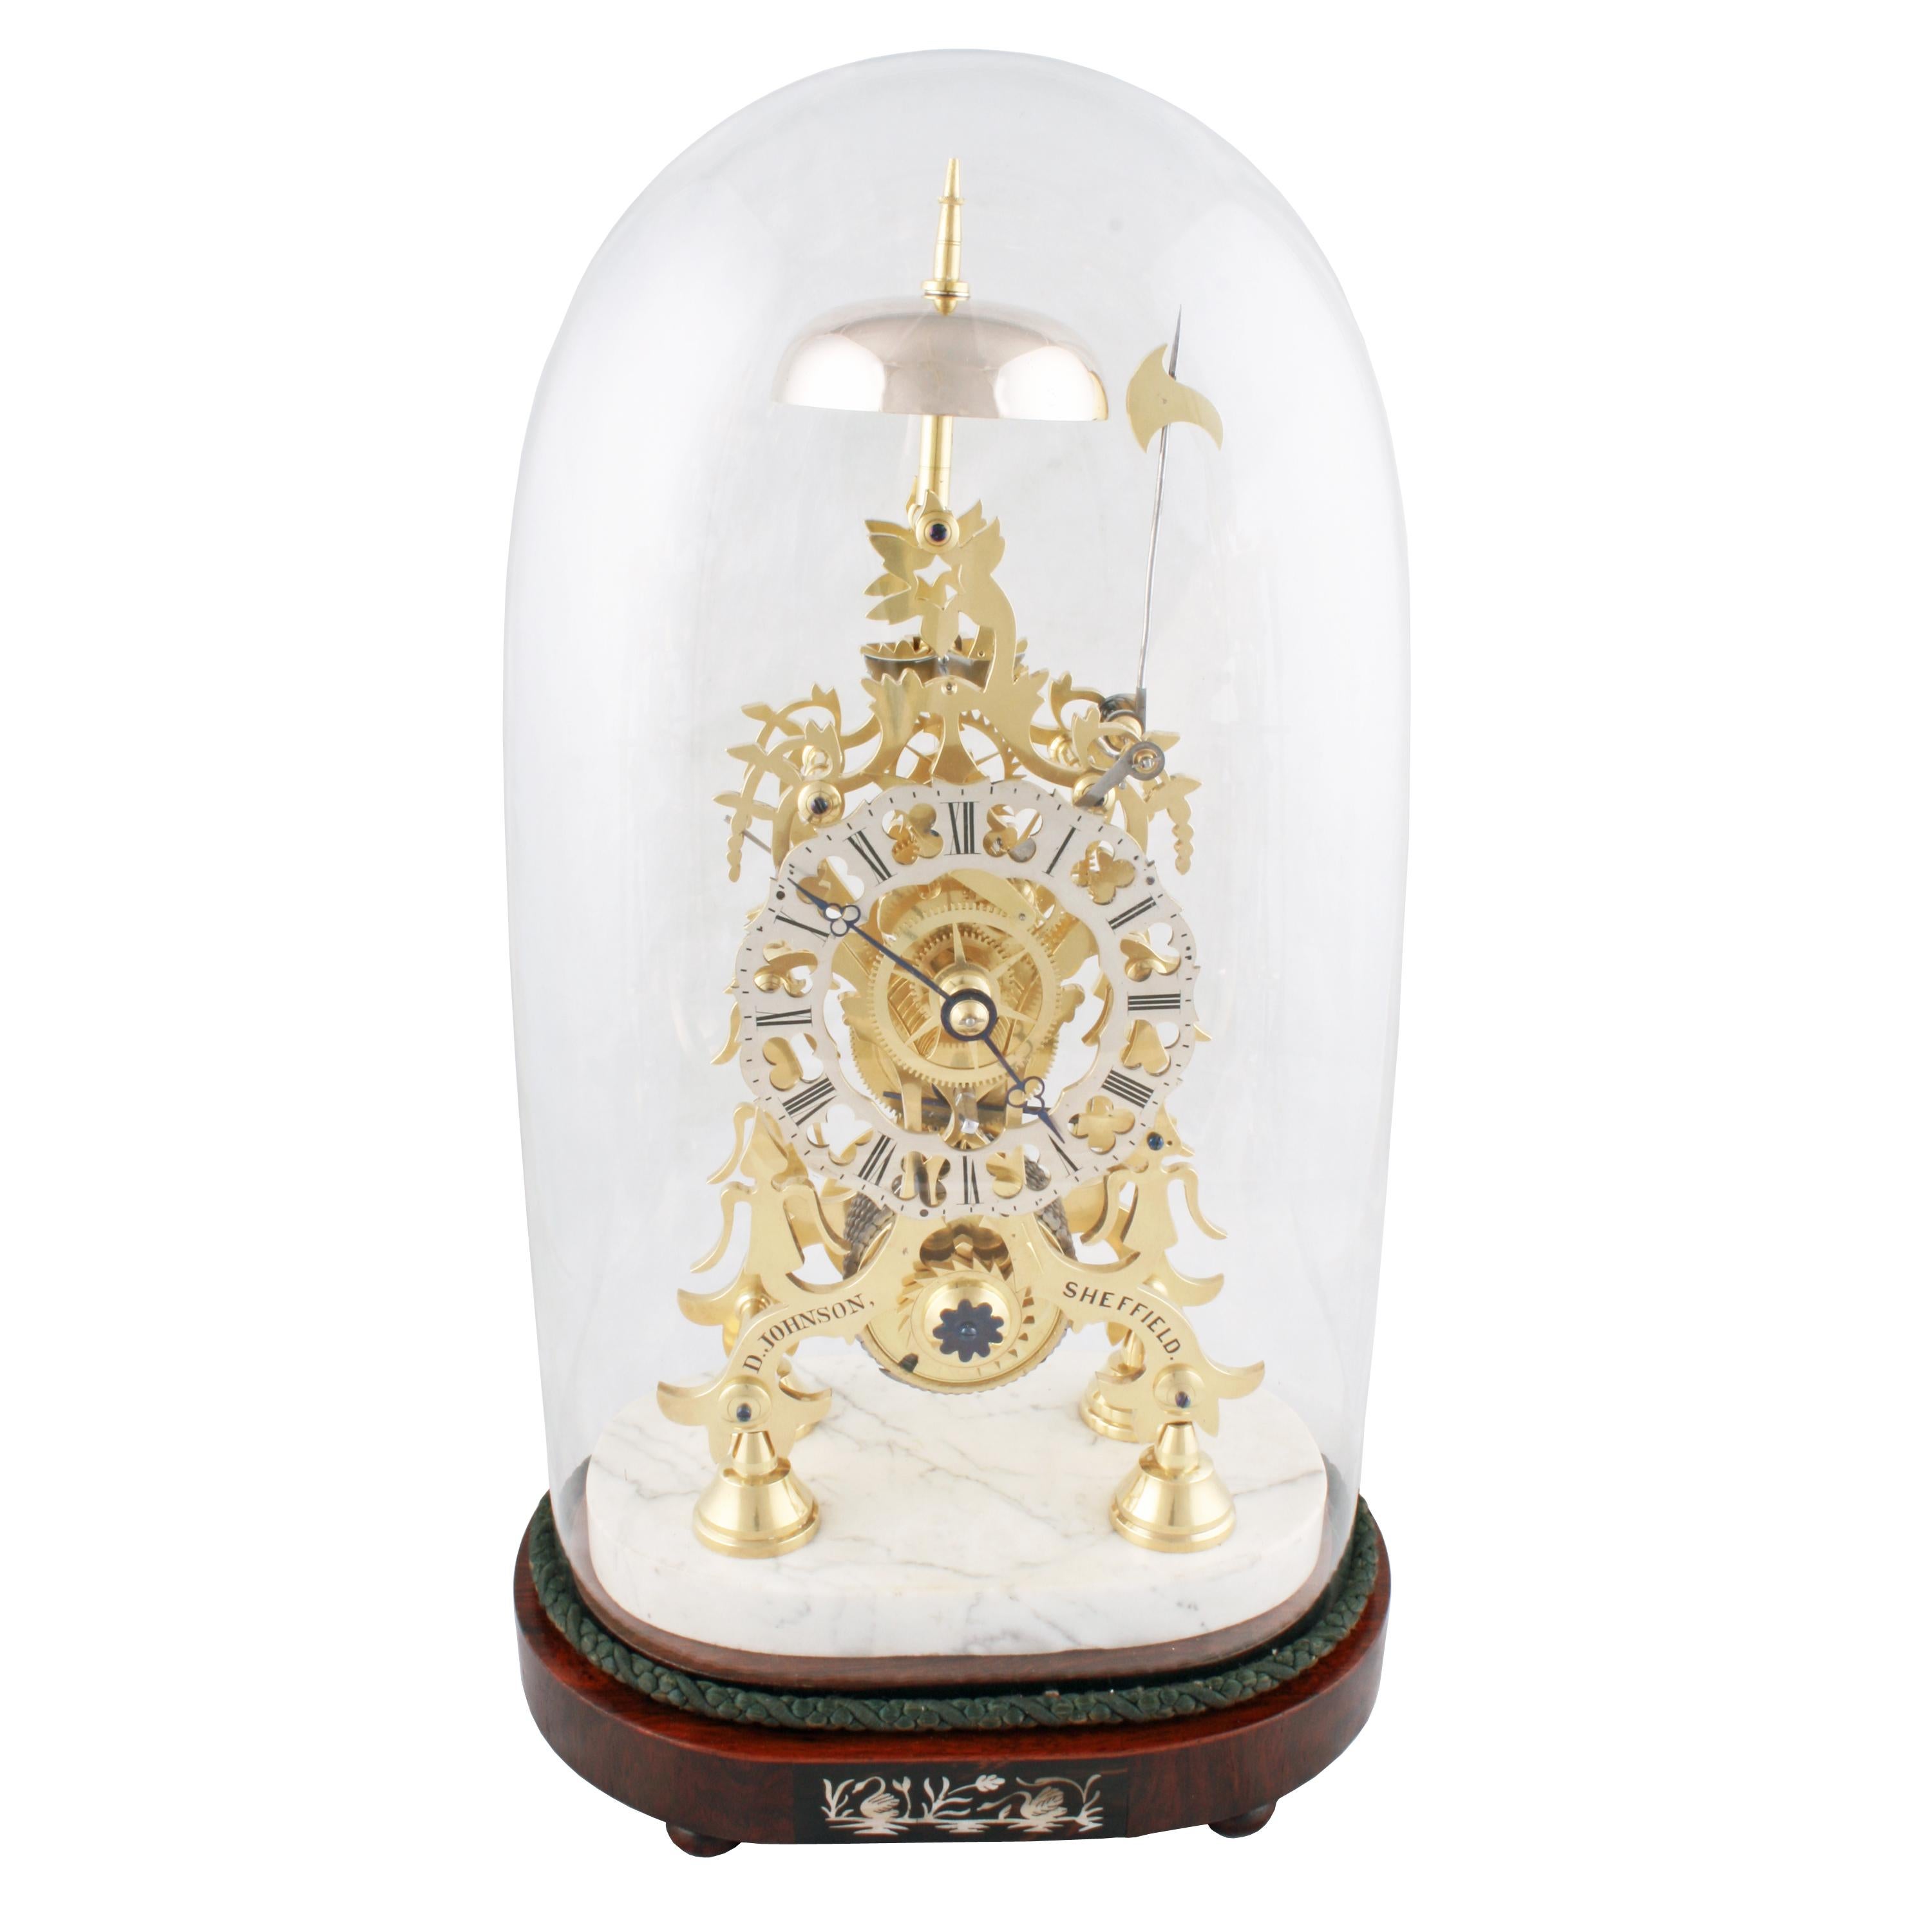 19th century skeleton clock


A mid-19th century polished brass skeleton clock and glass dome.

The clock has an eight day fuzee movement with a passing strike on the hour and a retailer's name engraved on the front 